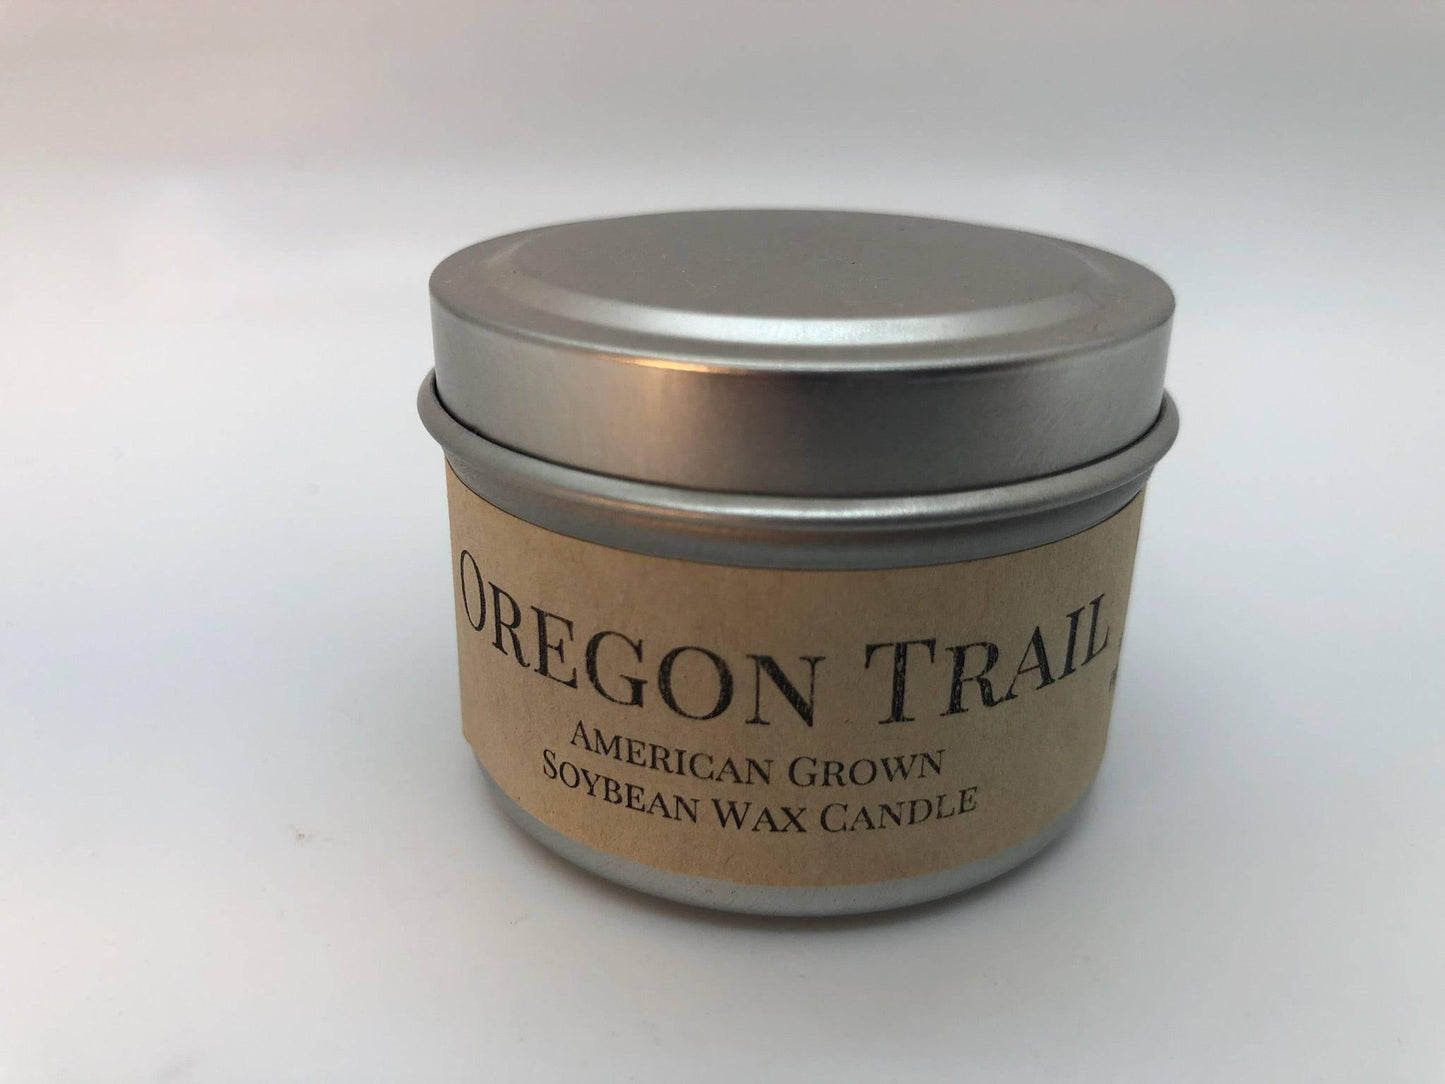 oregon trail soy wax candle | 2 oz travel tin by prairie fire tallow, candles, and lavender